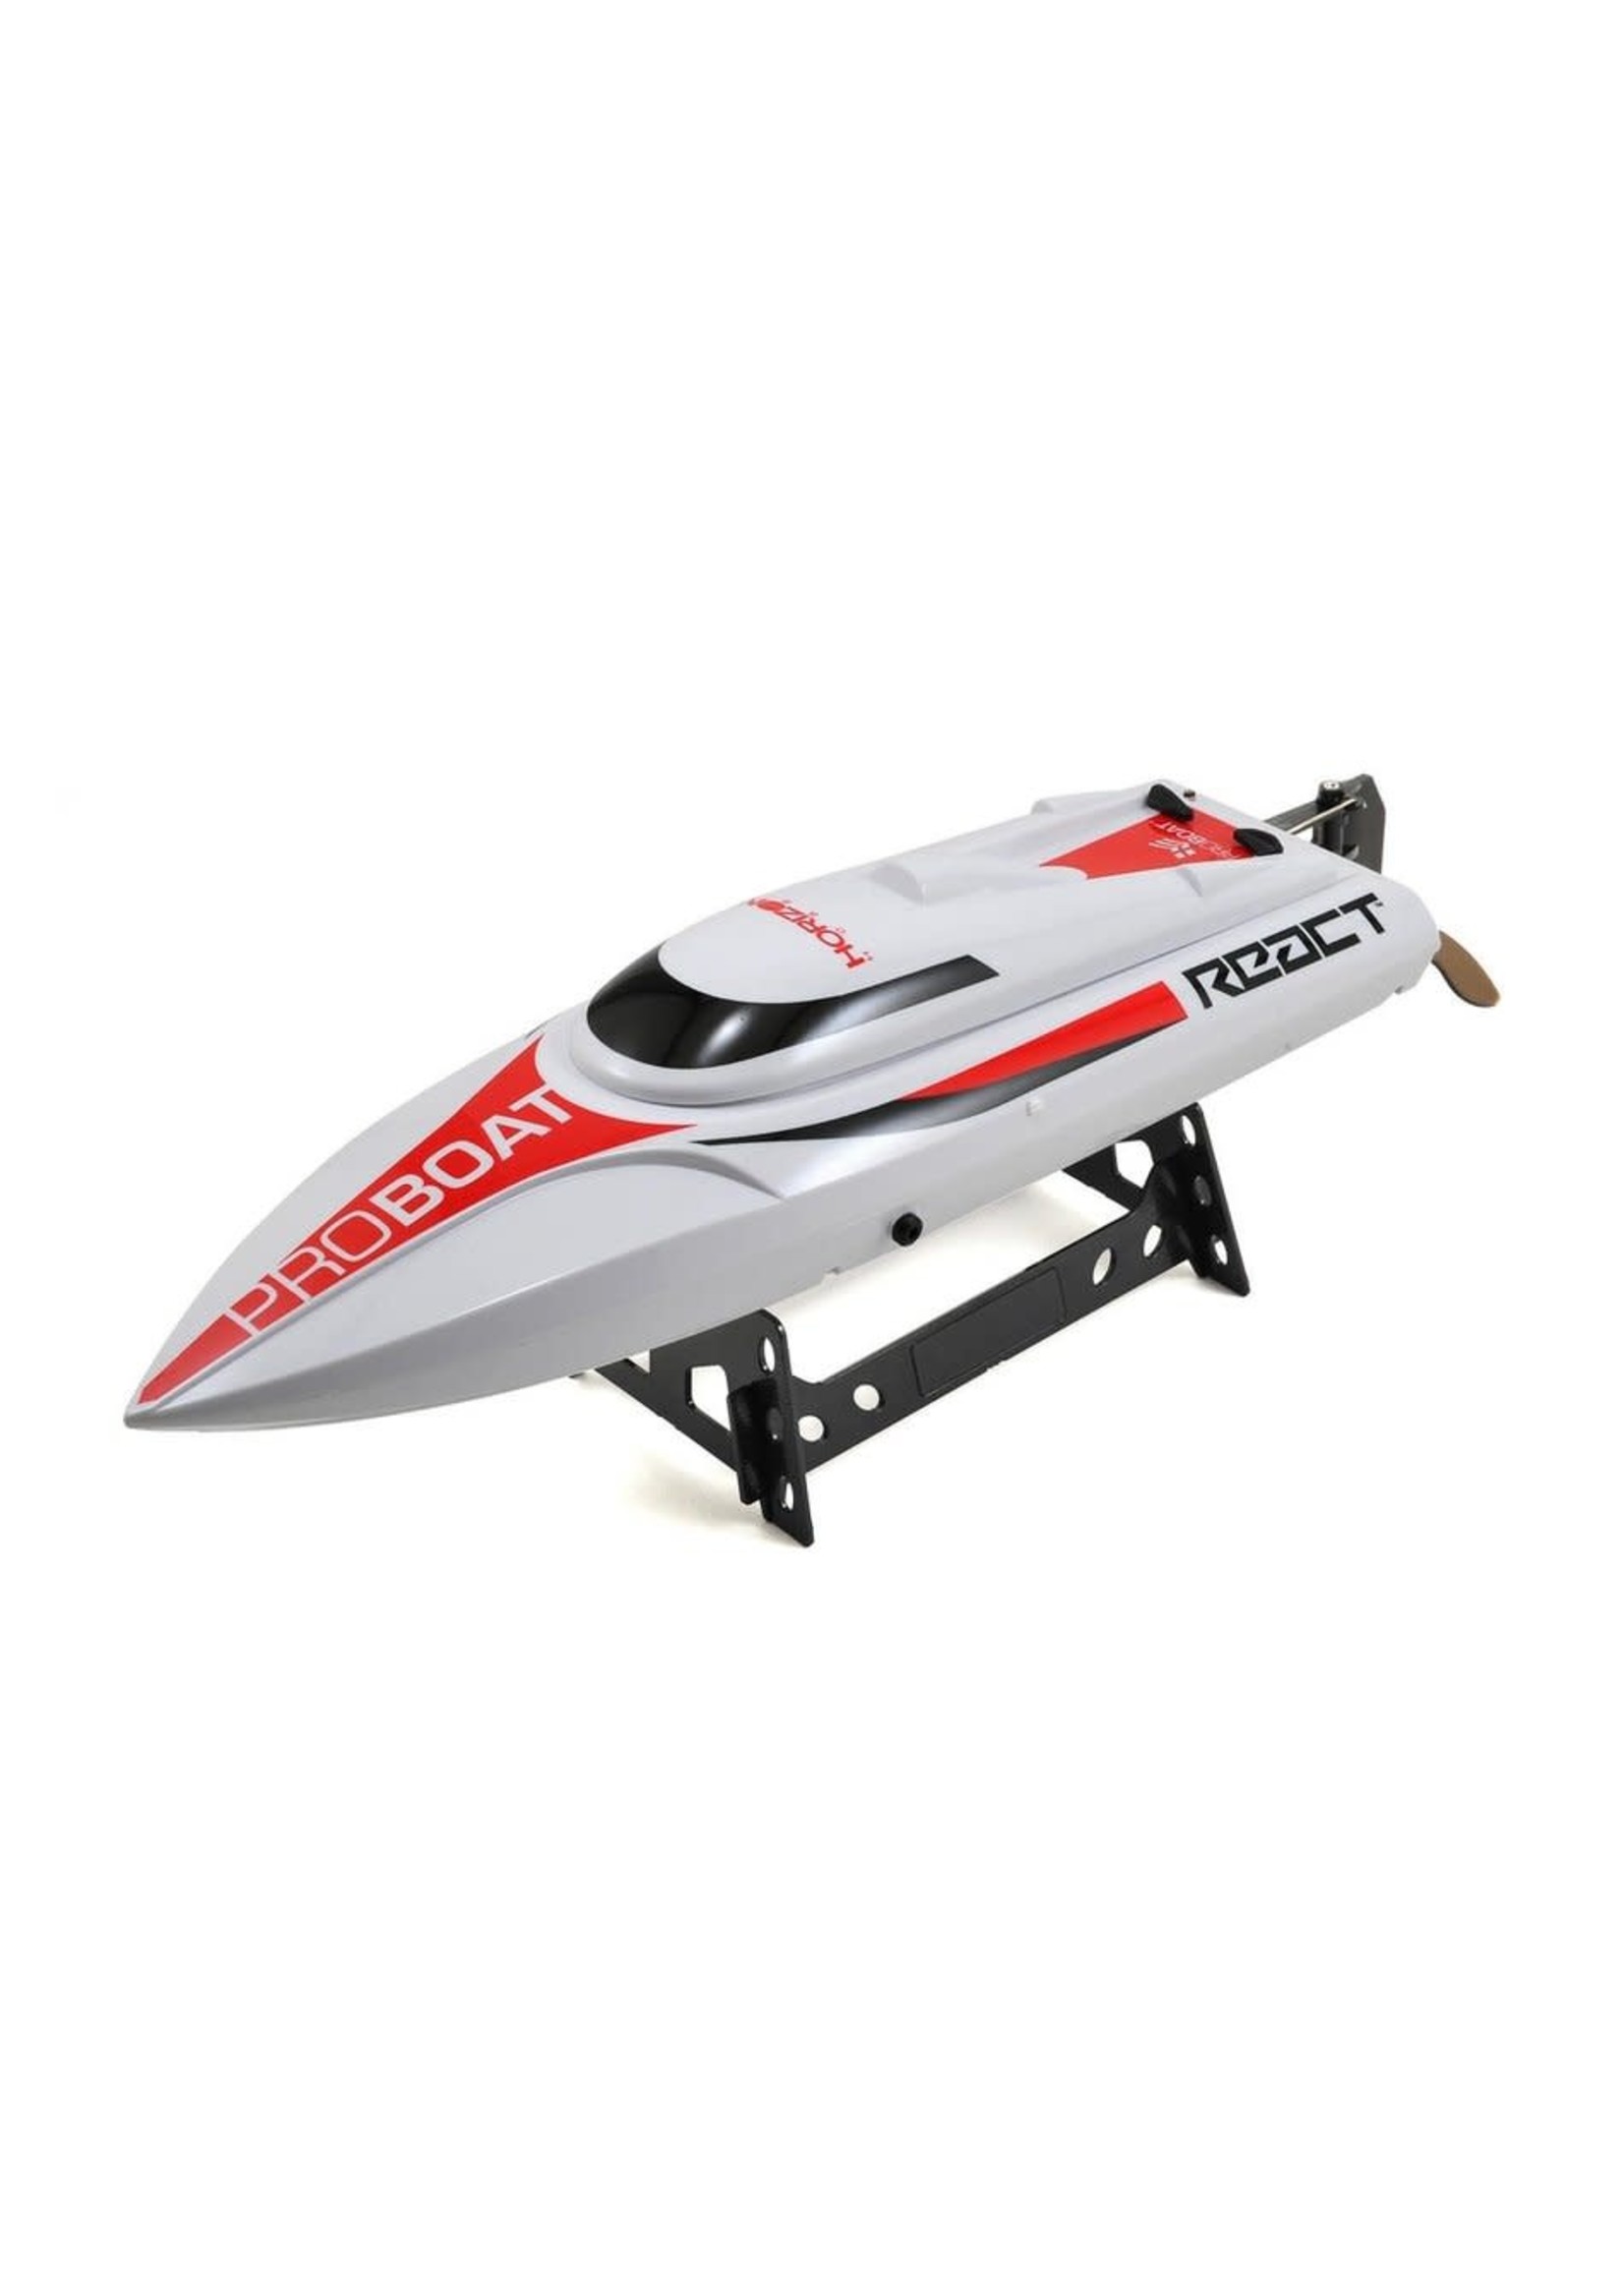 Proboat PRB08024 React 17-inch Self-Righting Deep-V Brushed:RTR